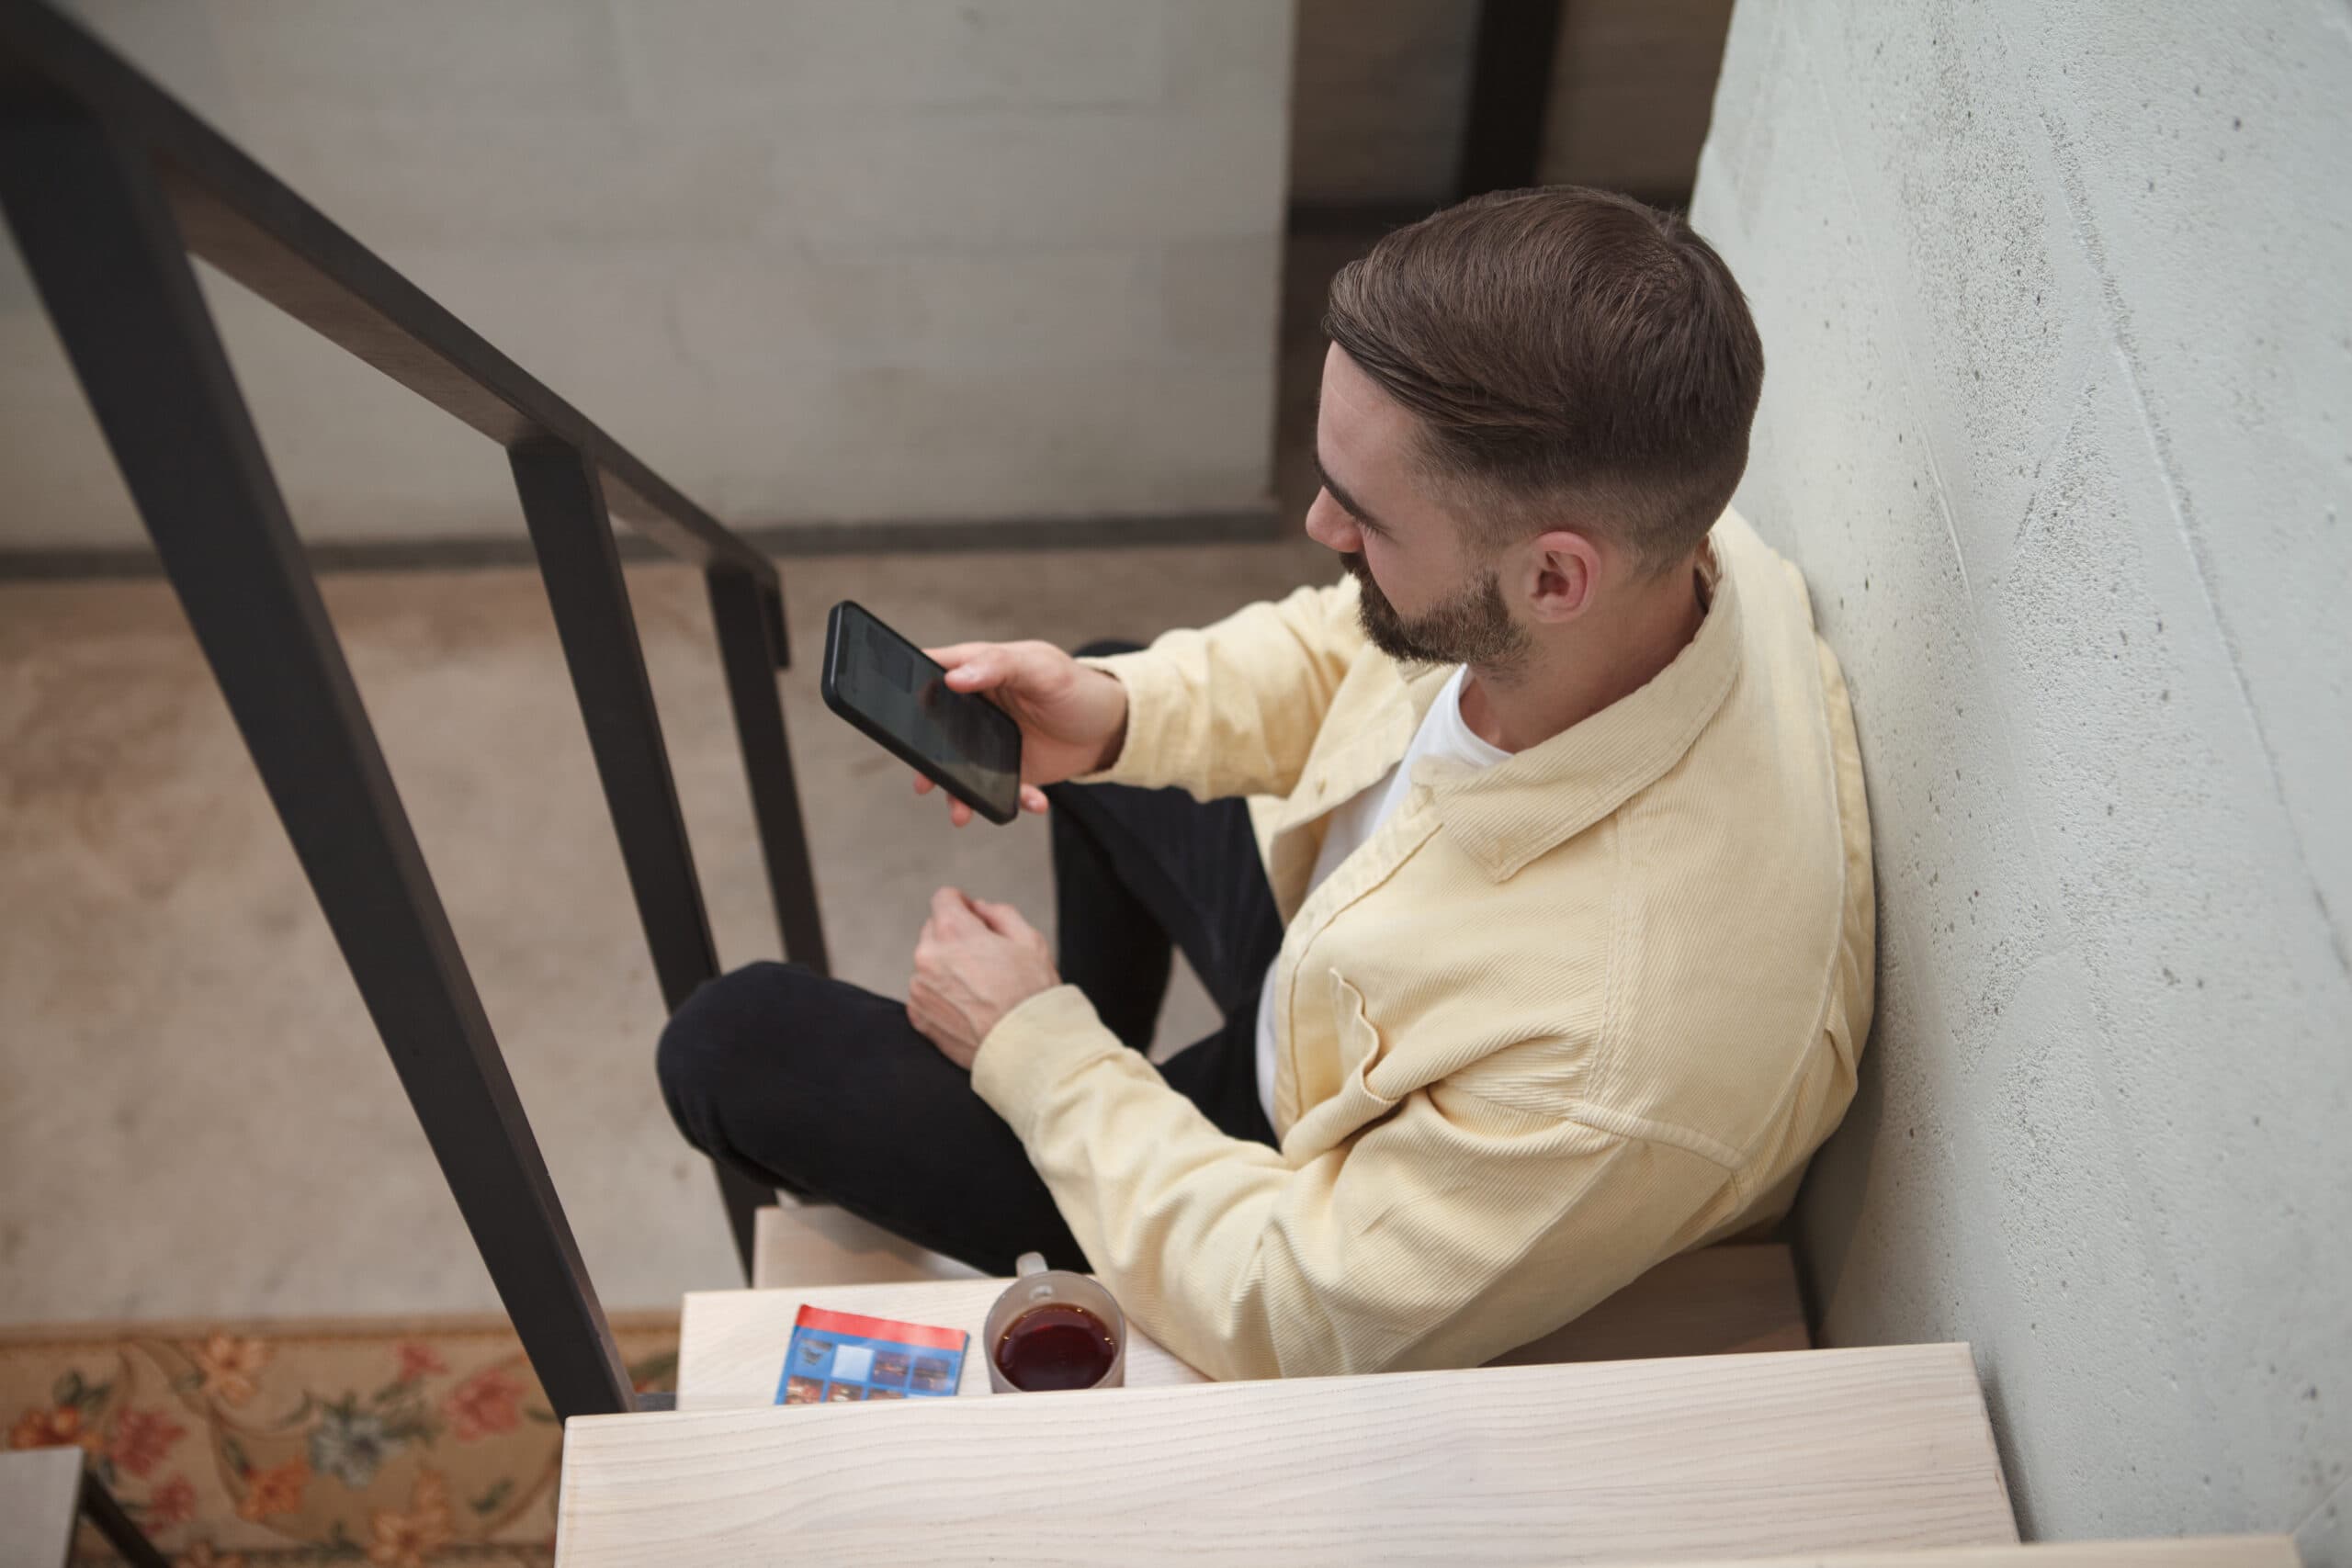 Top view shot of a man texting on his smart phone, sitting on a staircase.